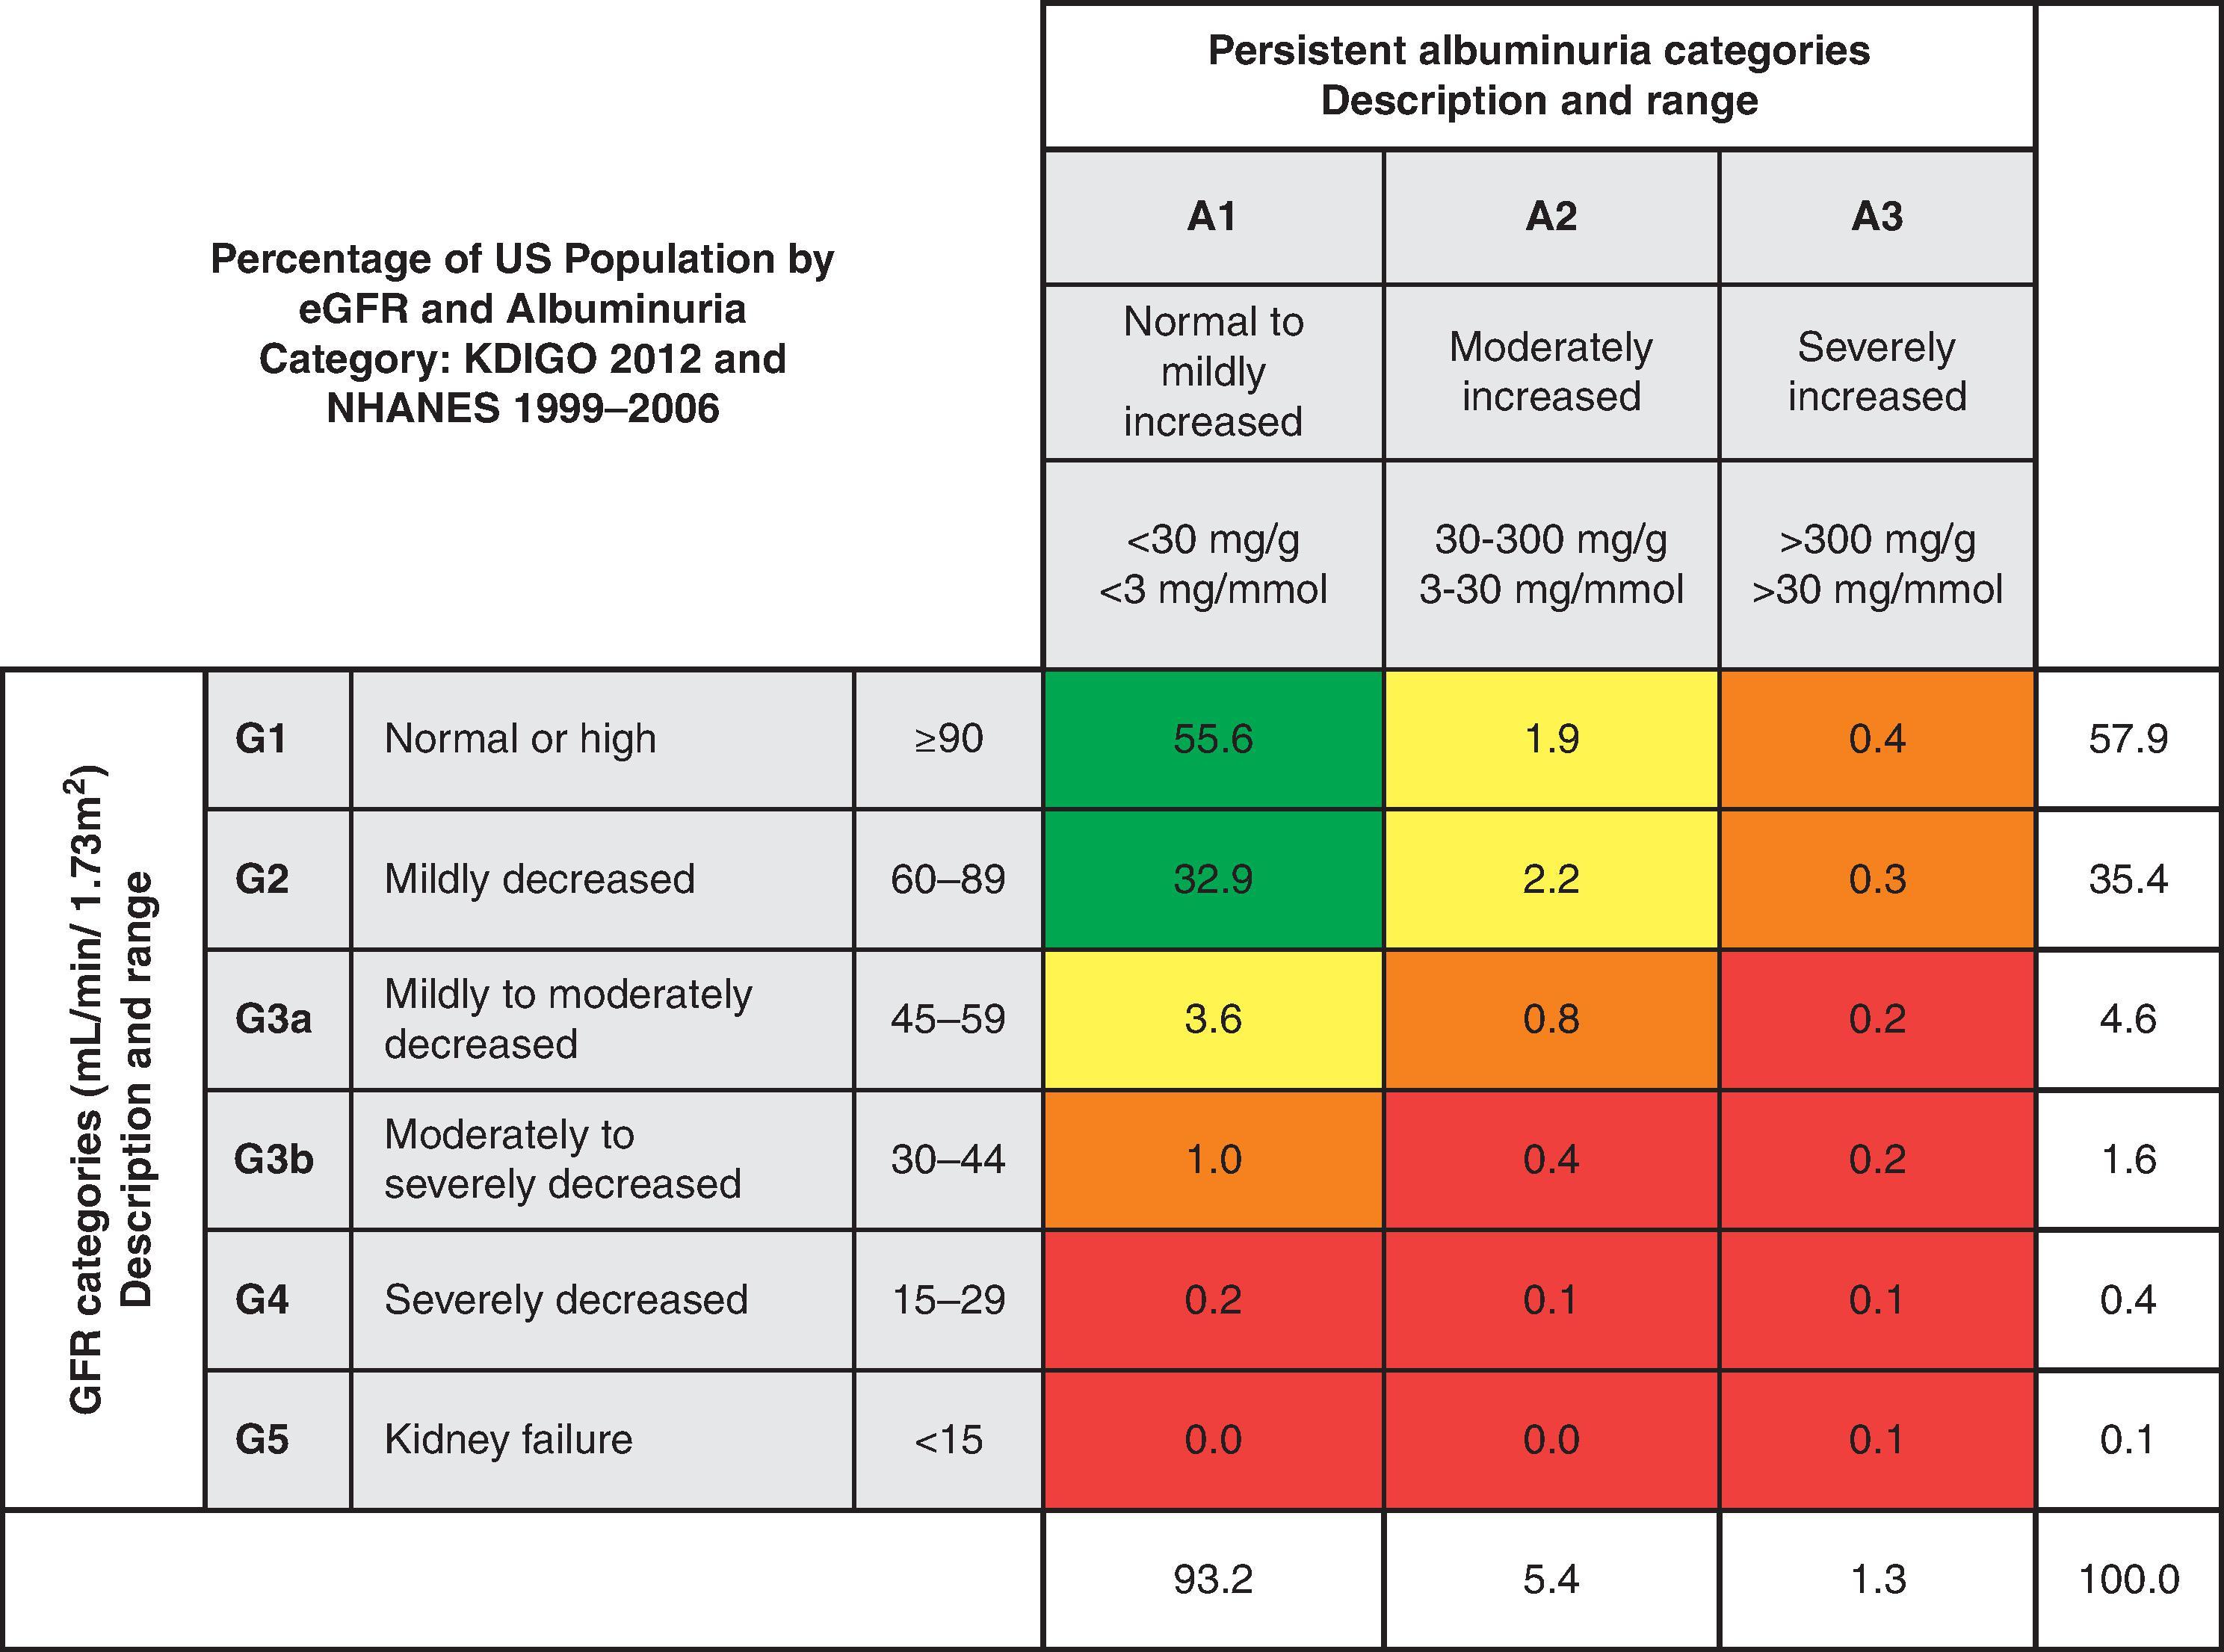 Fig. 51.2, Prognosis and prevalence of chronic kidney disease in the United States by glomerular filtration rate and albuminuria category. Colors reflect the ranking of relative risk for kidney disease progression and cardiovascular risk. Green, low risk (if no other markers of kidney disease, no chronic kidney disease [CKD]); Yellow, moderately increased risk; Orange, high risk; Red, very high risk. Cells show the proportion of adult population in the United States. Data from the NHANES 1999 to 2006, N = 18,026. Glomerular filtration rate (GFR) is estimated from a single measurement of standardized serum creatinine with the CKD-EPI 2009 creatinine equation. Albuminuria is determined by one measurement of albumin-to-creatinine ratio, and persistence is estimated. Values in cells do not total to values in margins because of rounding. Category of very high albuminuria includes nephrotic range. eGFR, Estimated glomerular filtration rate; KDIGO, Kidney Disease: Improving Global Outcomes; NHANES, National Health and Nutrition Examination Survey. (From Kidney Disease: Improving Global Outcomes (KDIGO) CKD Work Group. KDIGO 2012 Clinical practice guideline for the evaluation and management of chronic kidney disease. Kidney Int Suppl . 2013;3:1–150.)